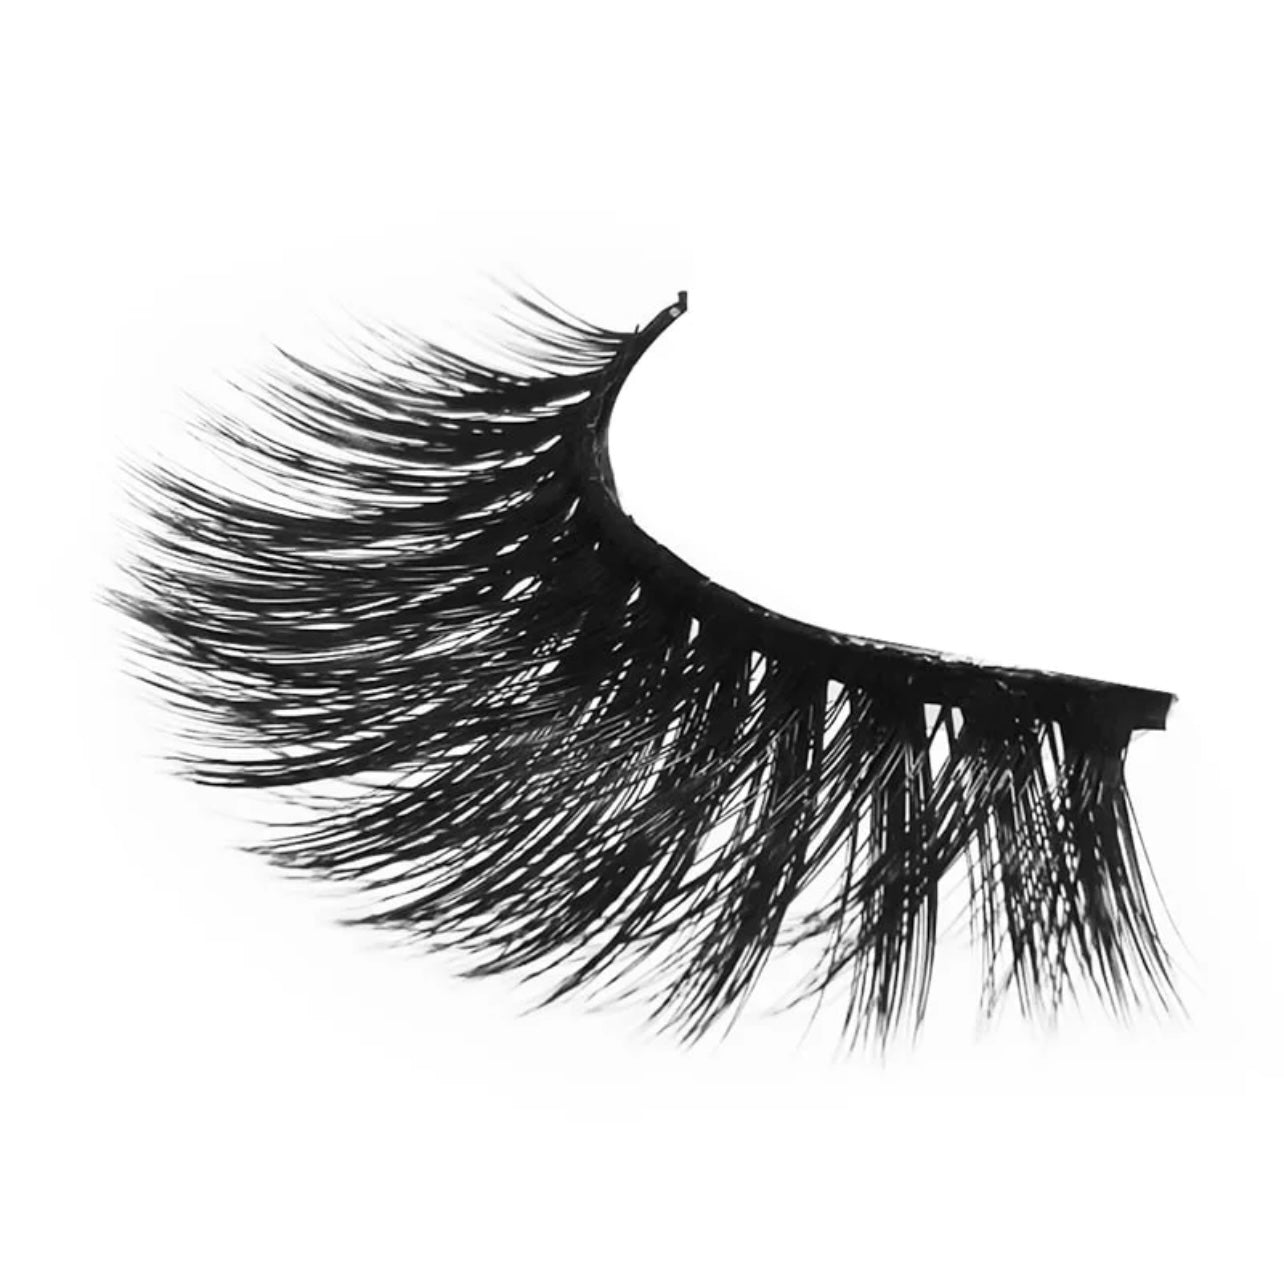 Enchanted Lashes - Flawless